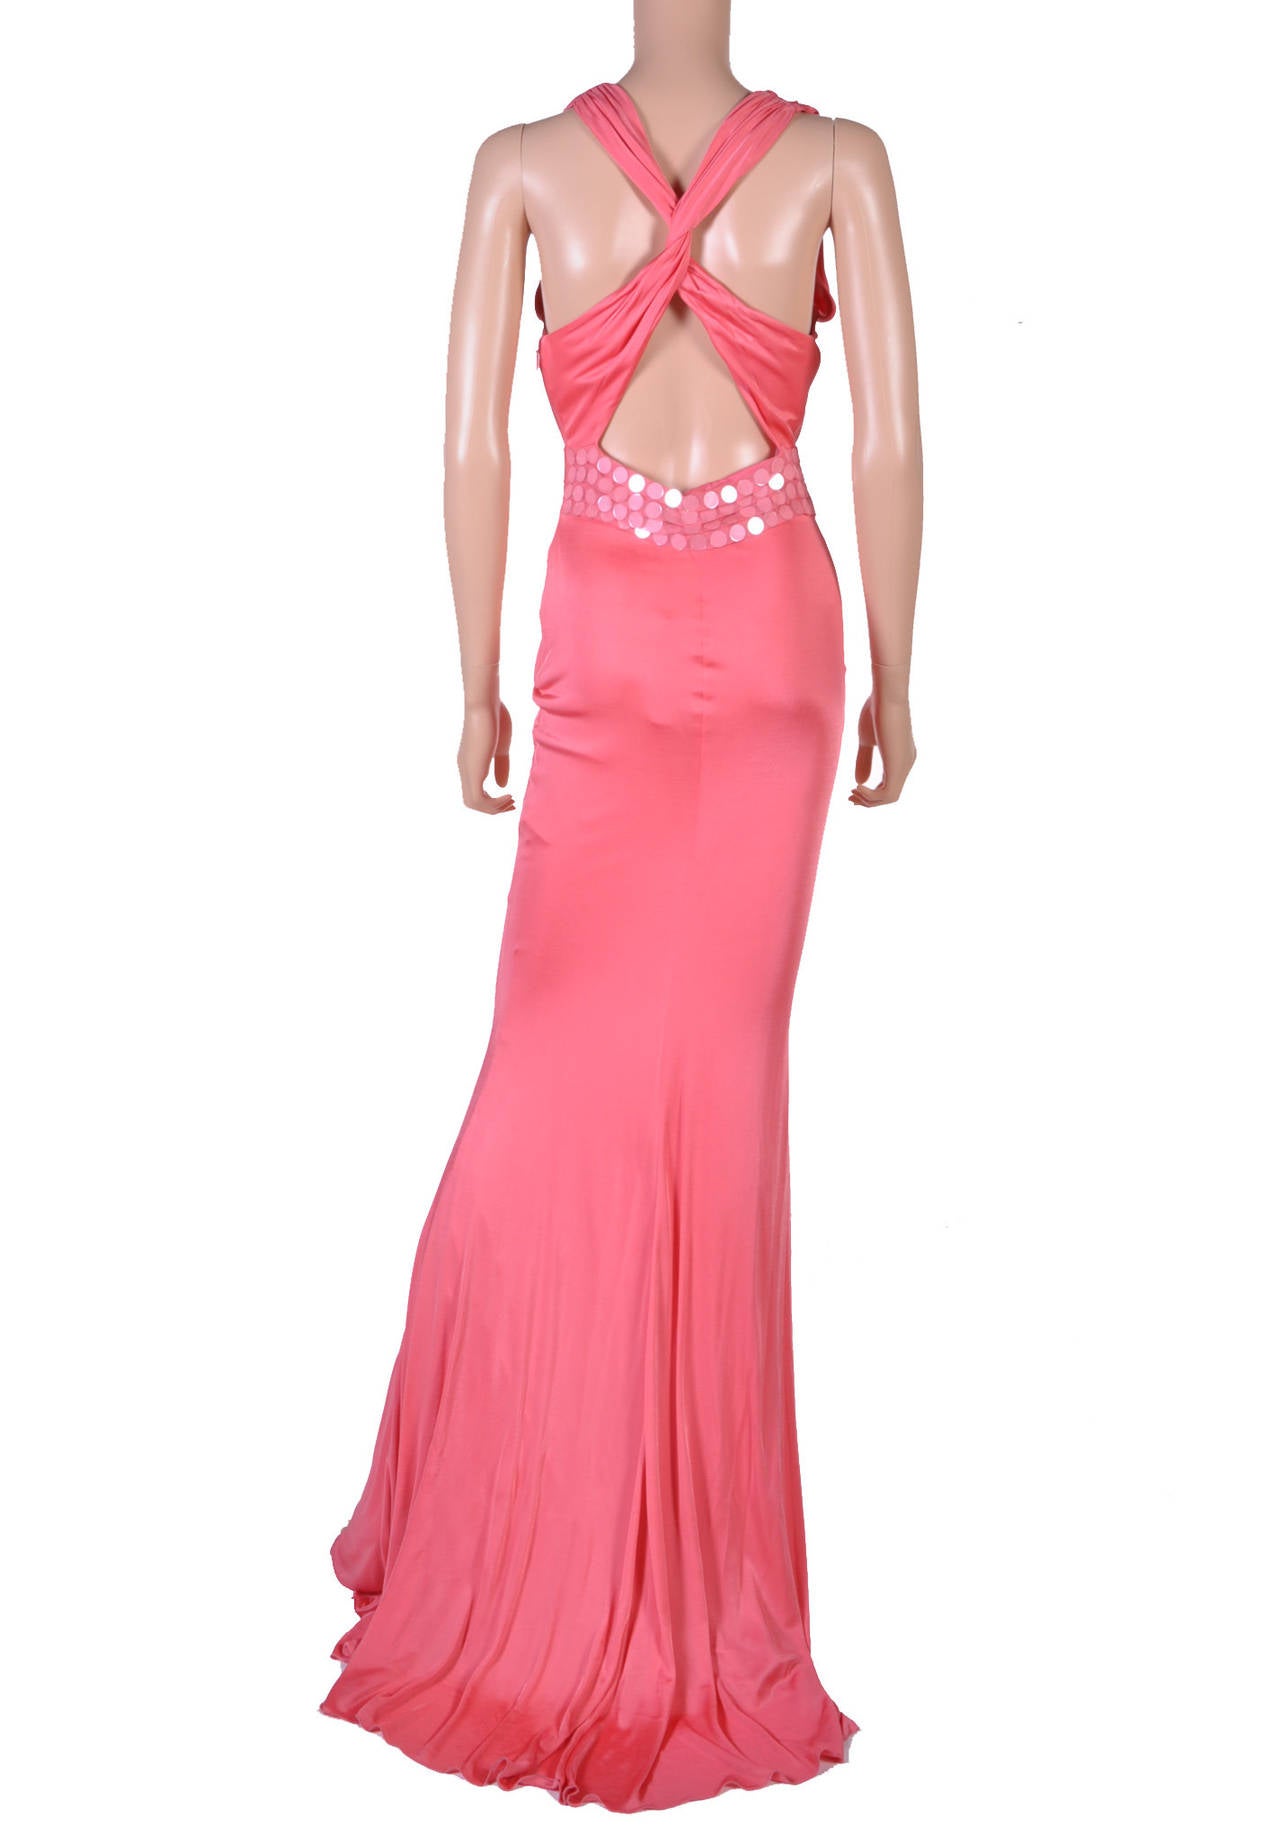 Women's Mid 2000-s VINTAGE VERSACE EMBELLISHED PINK GOWN 